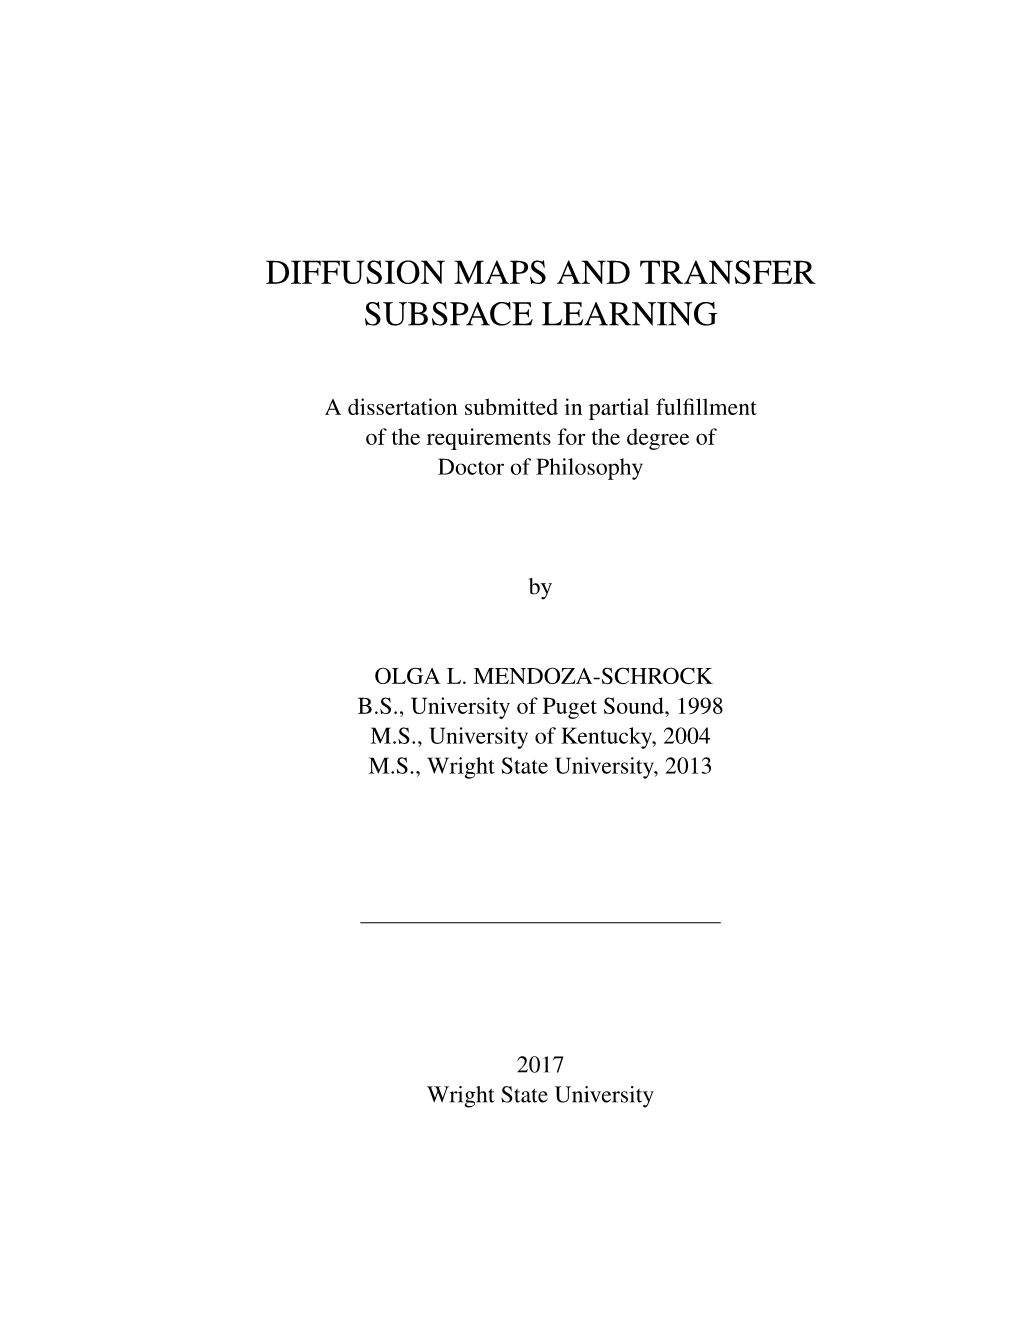 Diffusion Maps and Transfer Subspace Learning